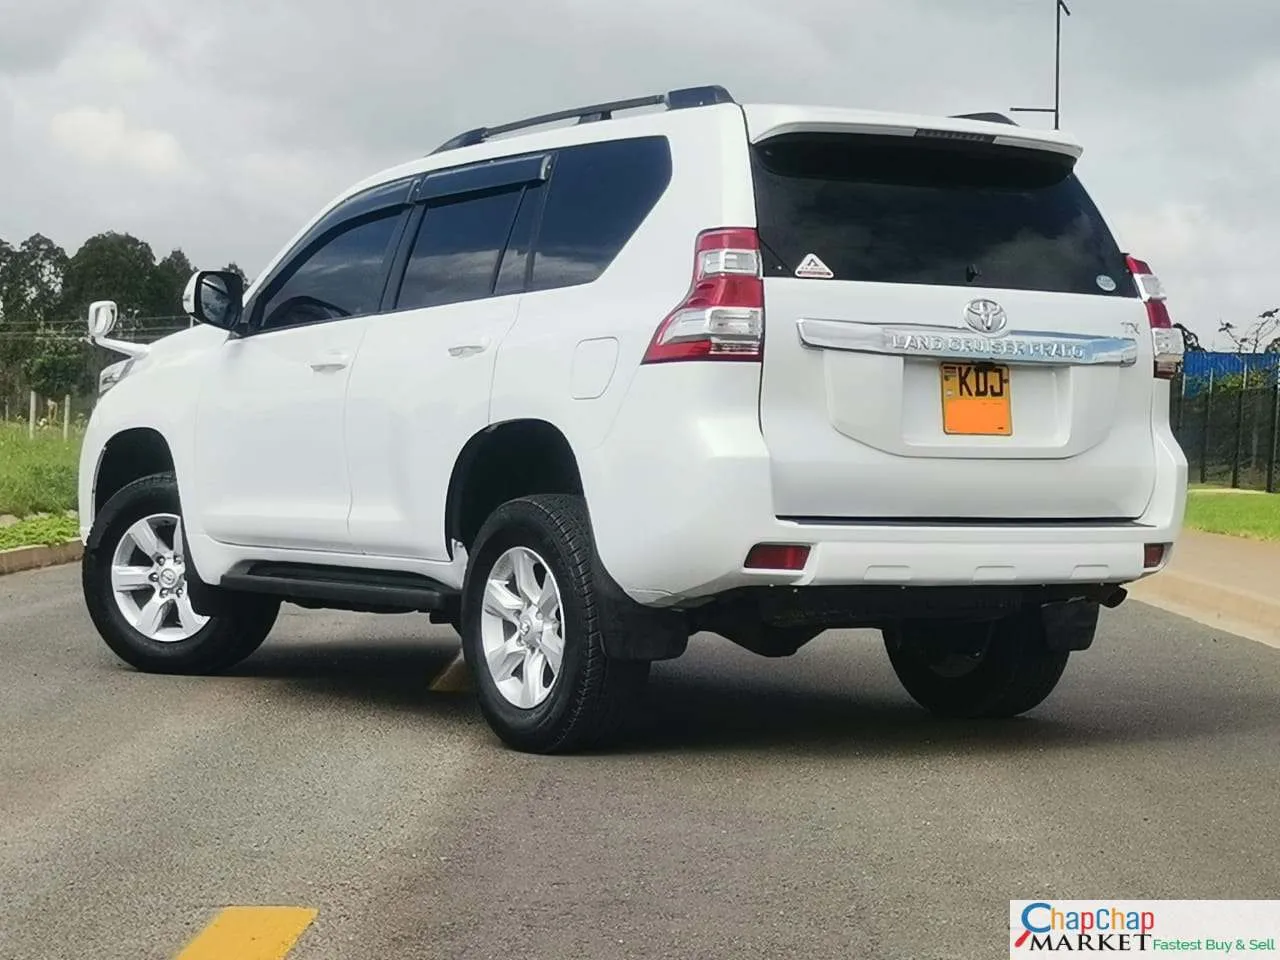 Toyota Prado j150 QUICKEST 🔥 You Pay 40% Deposit Trade in OK EXCLUSIVE Toyota Prado for sale in kenya hire purchase installments EXCLUSIVE